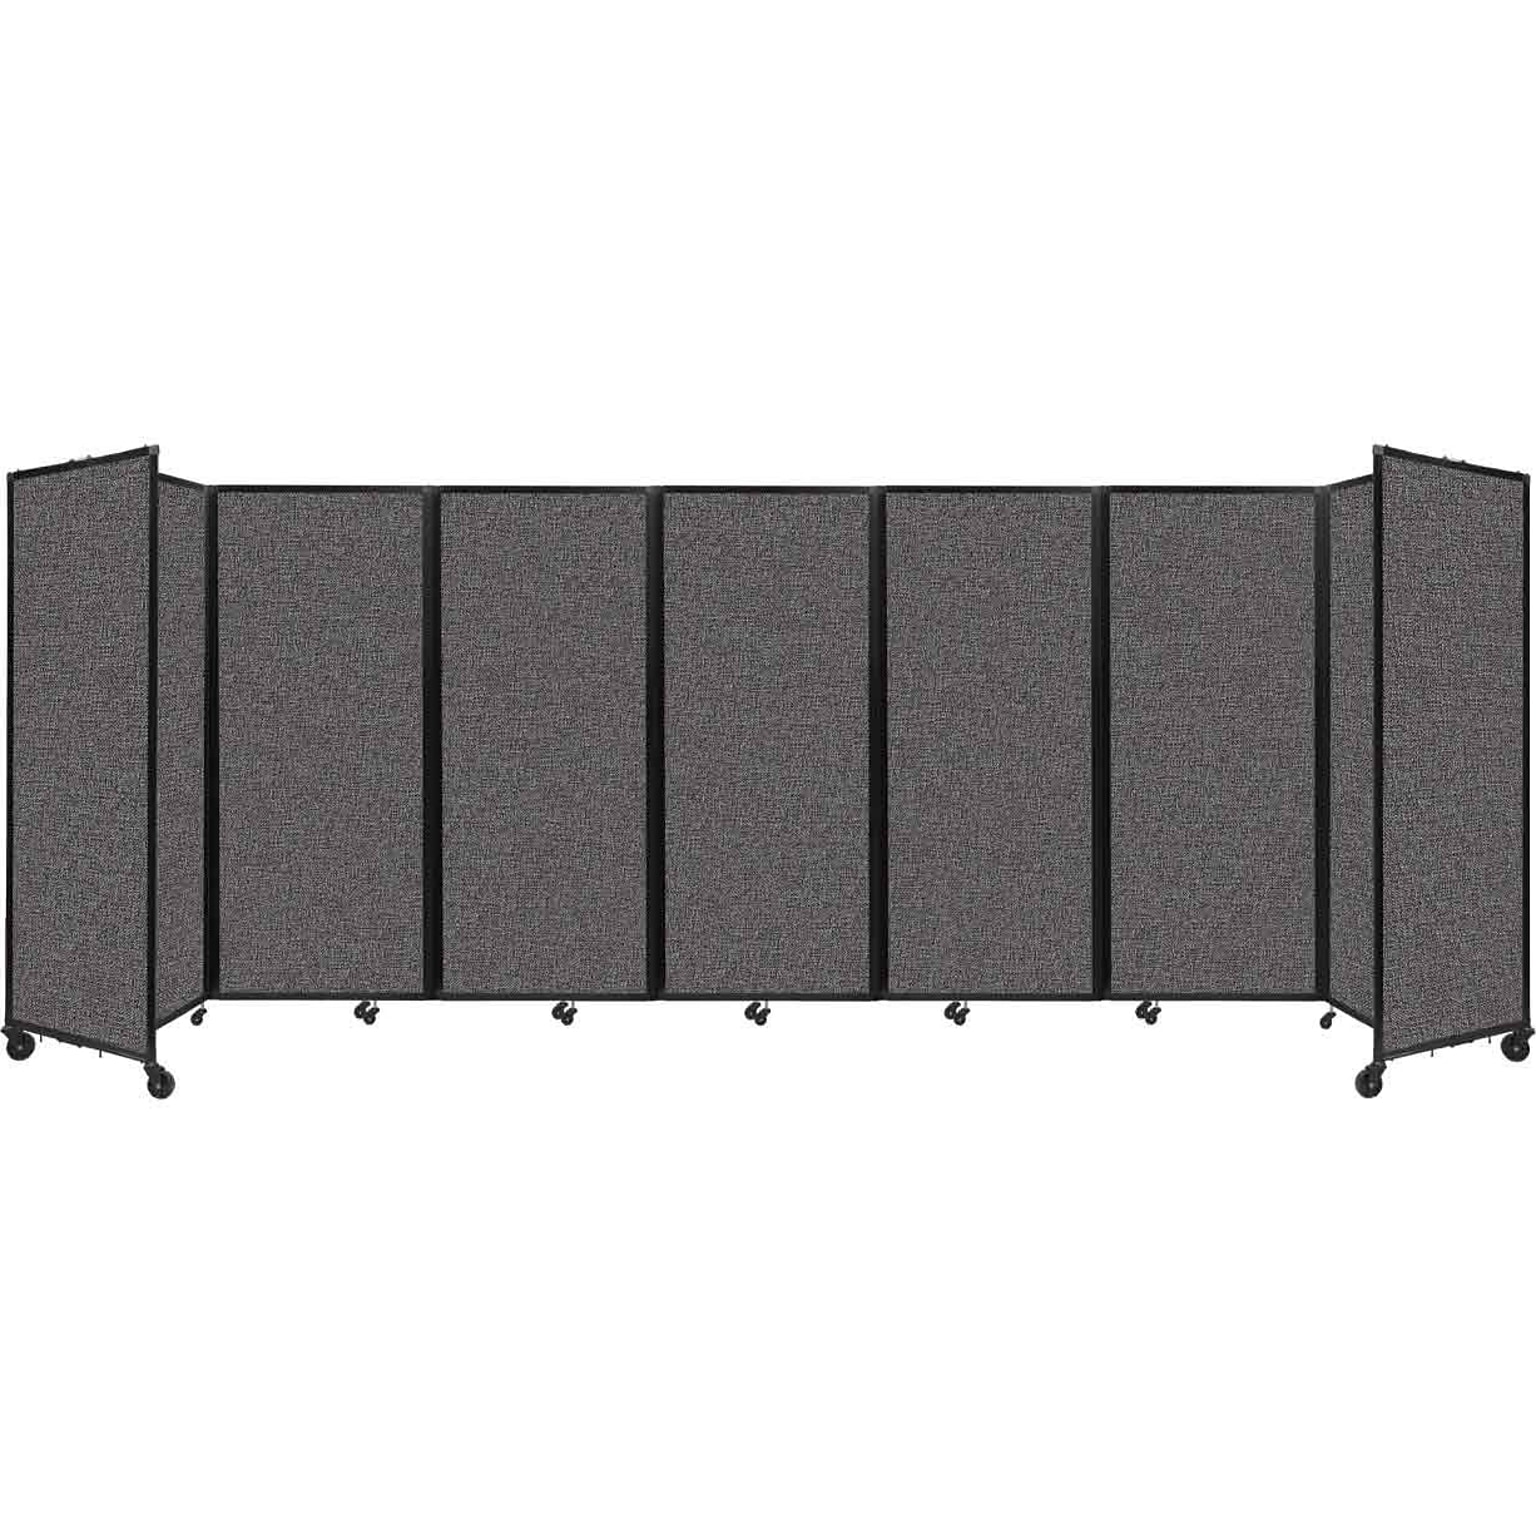 Versare The Room Divider 360 Freestanding Folding Portable Partition, 82H x 234W, Charcoal Gray Fabric (1182707)